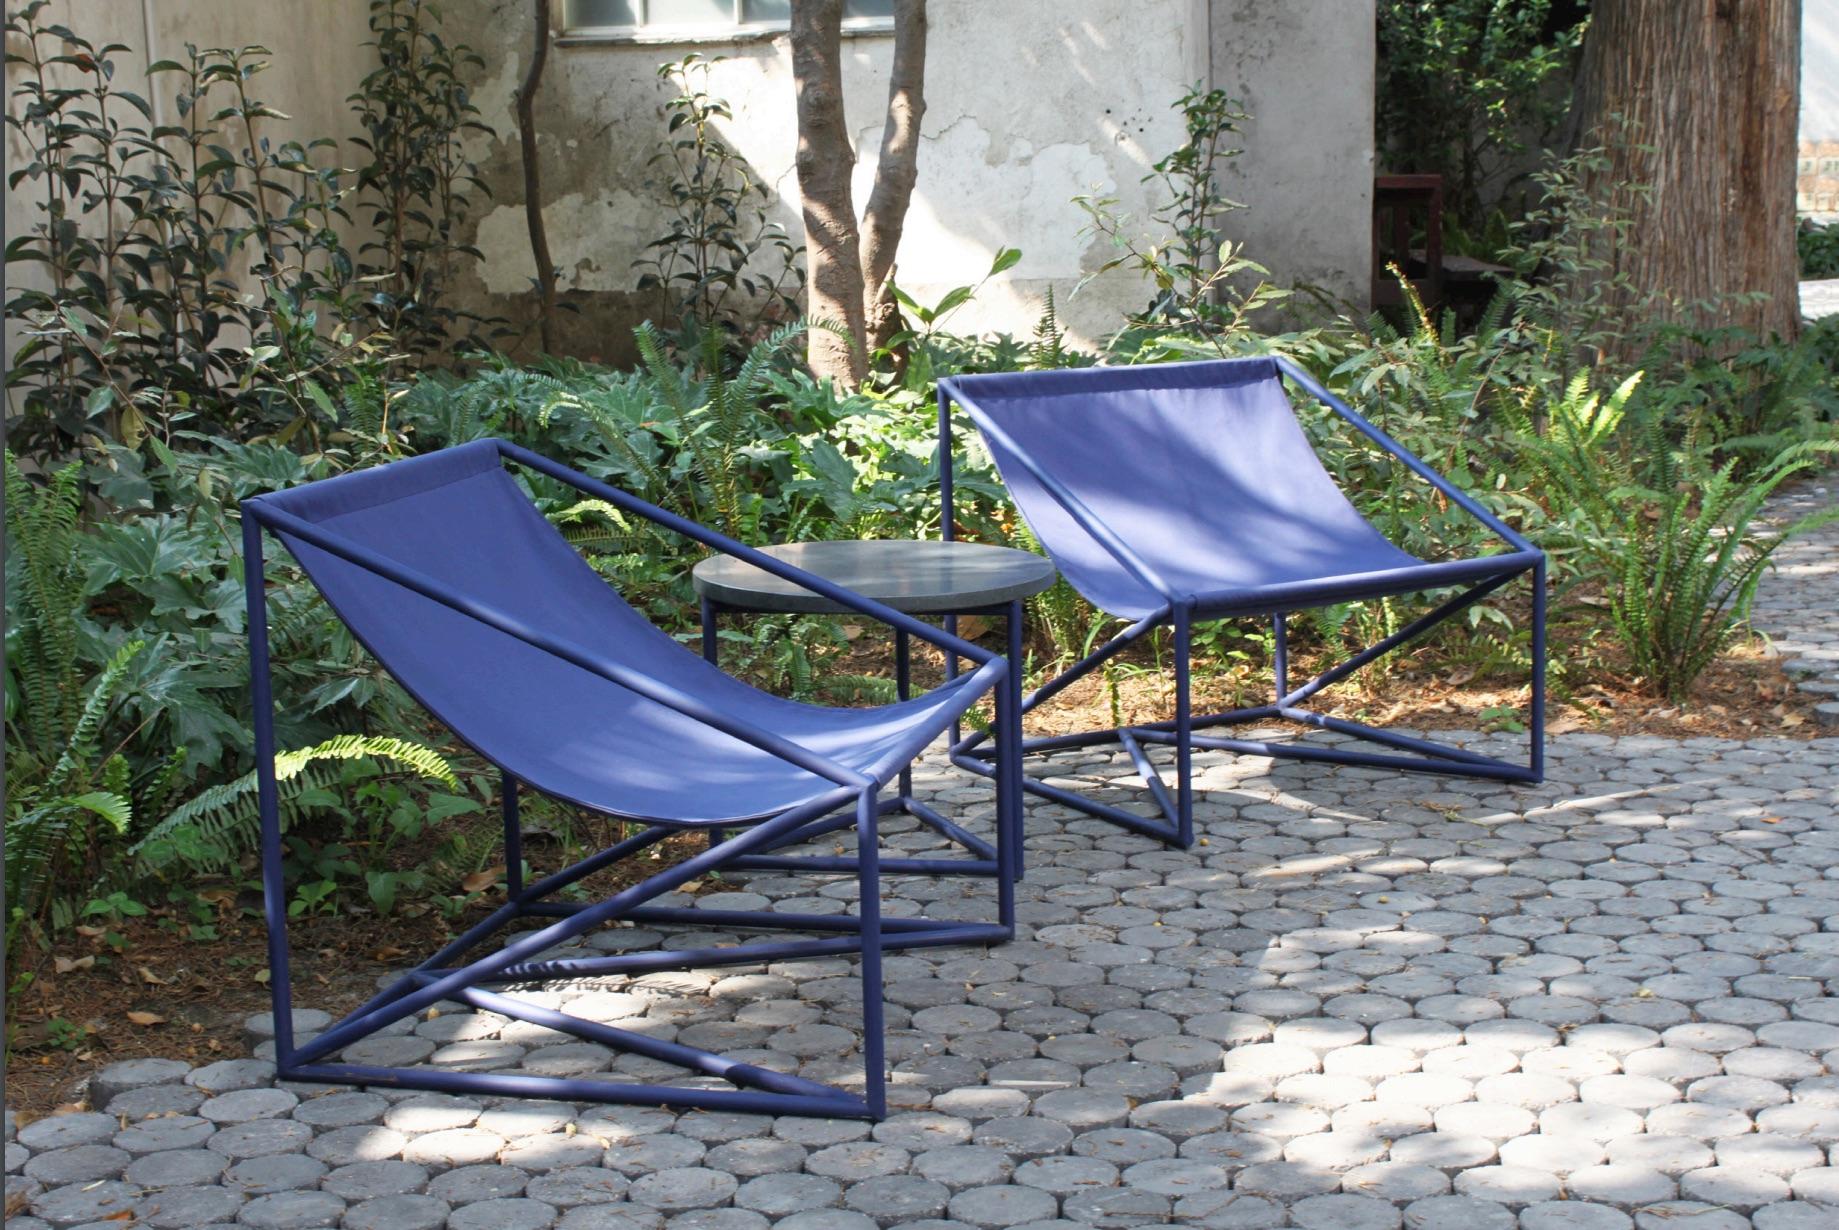 Outdoor furniture design by Maria Beckmann. These outdoor chairs are made from steel tubing and thick canvas.

La Tuba Outdoor Chair is available in multiple sizes.

Materials: Steel with canvas (outdoor use) / Steel with leather (indoor use) /